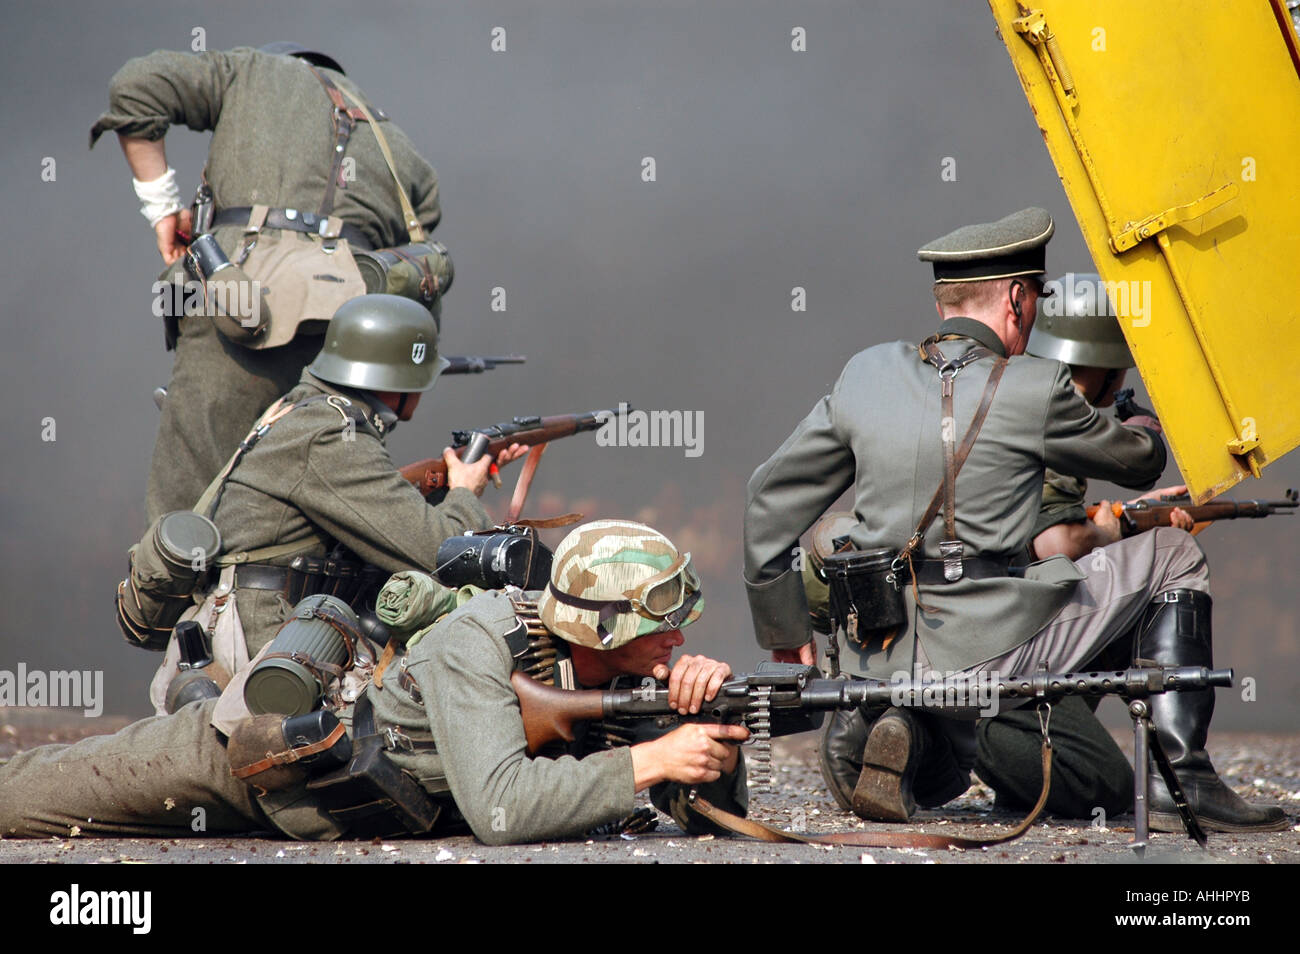 Historical reenactment of Warsaw Uprising in 1944 during II World War. Nazi unit attacking partisans postions. Stock Photo